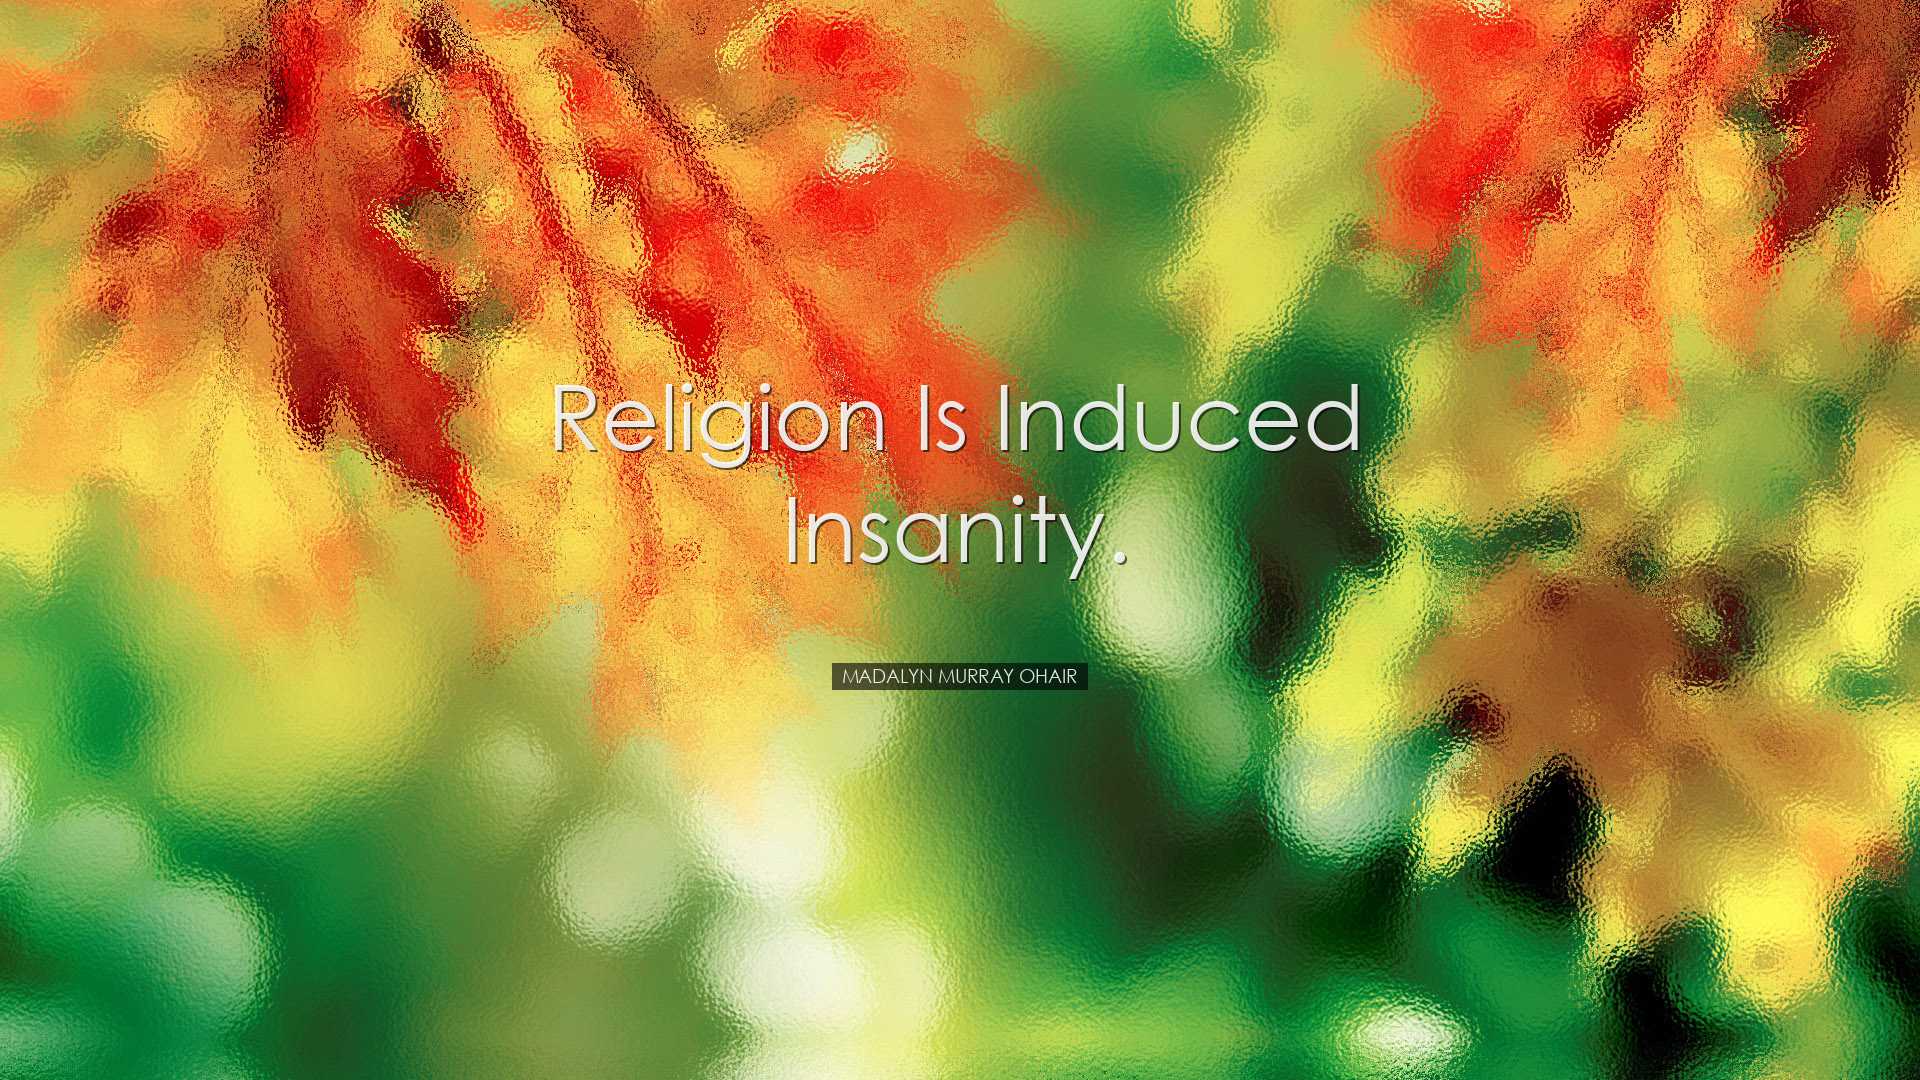 Religion is induced insanity. - Madalyn Murray OHair